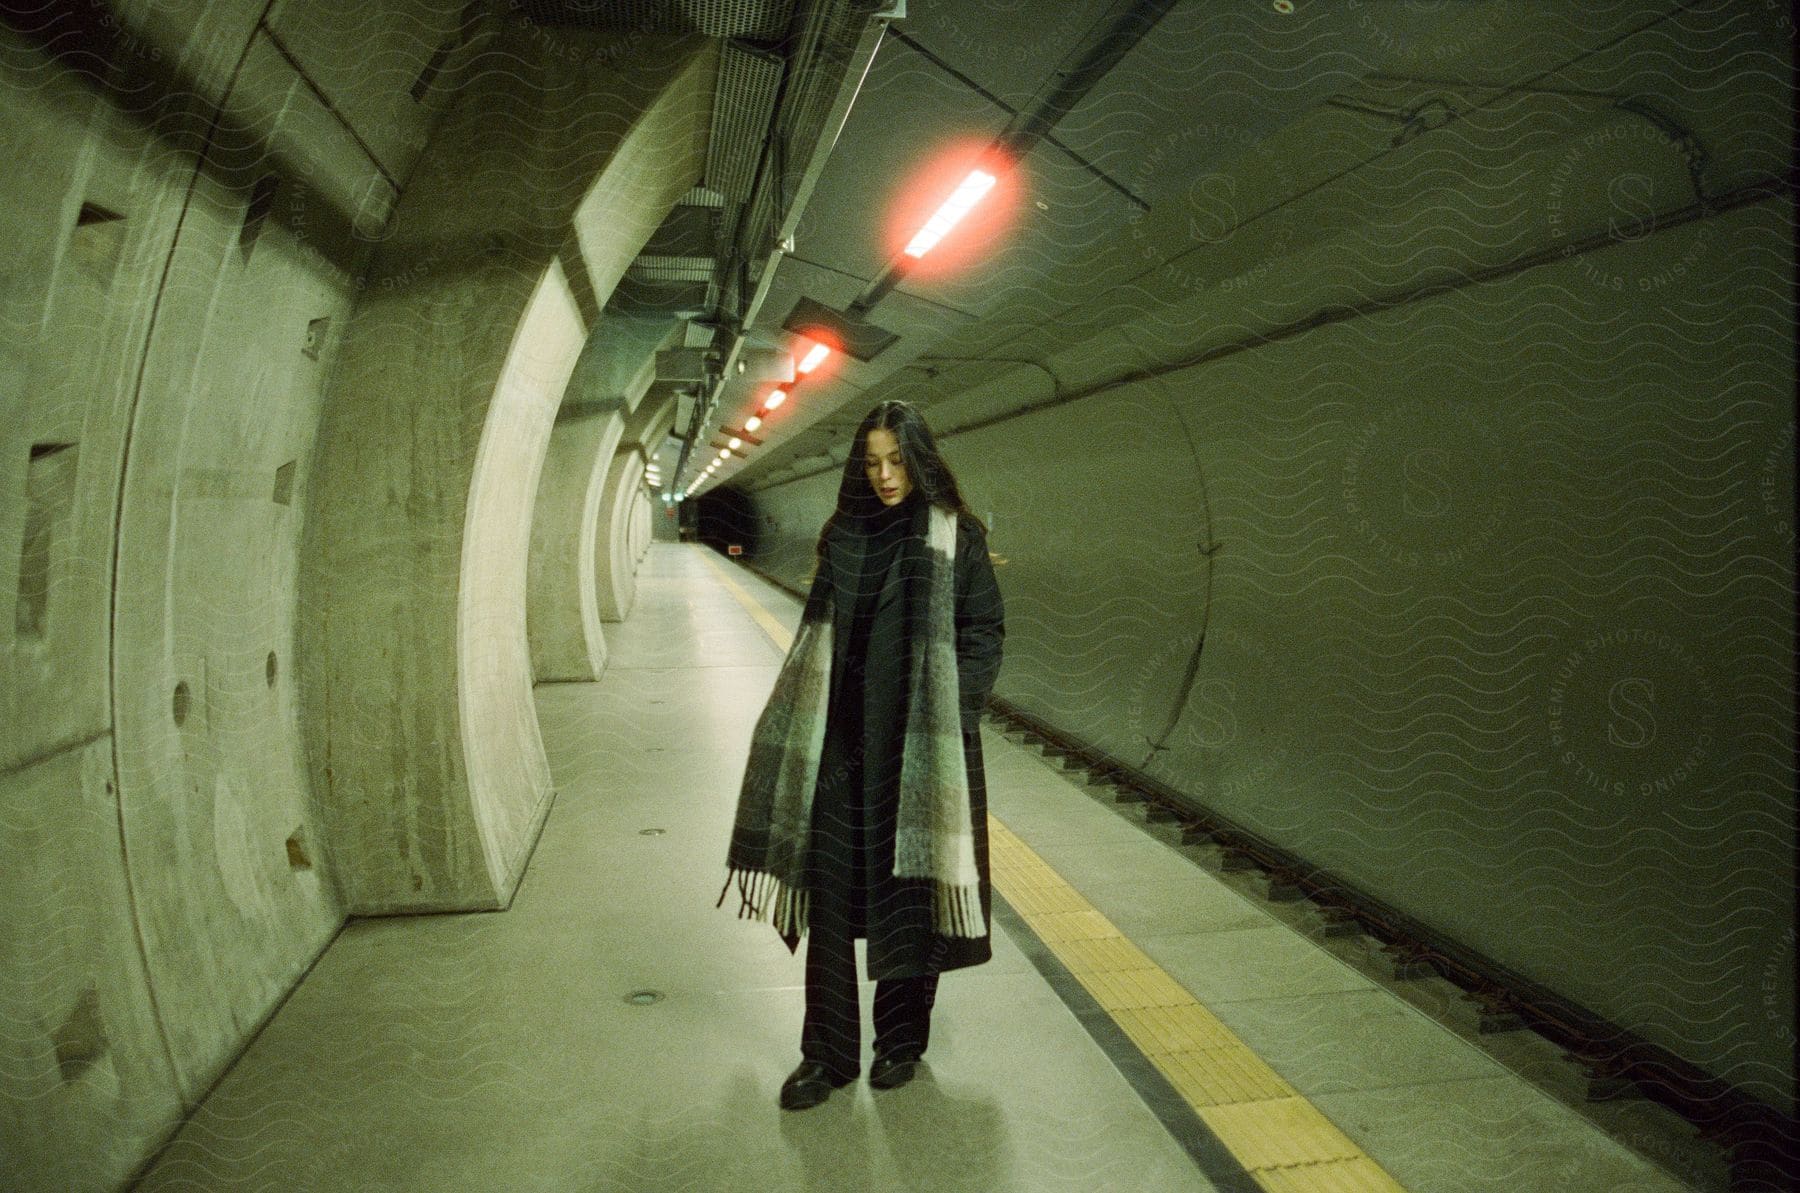 A woman standing in a train station at night